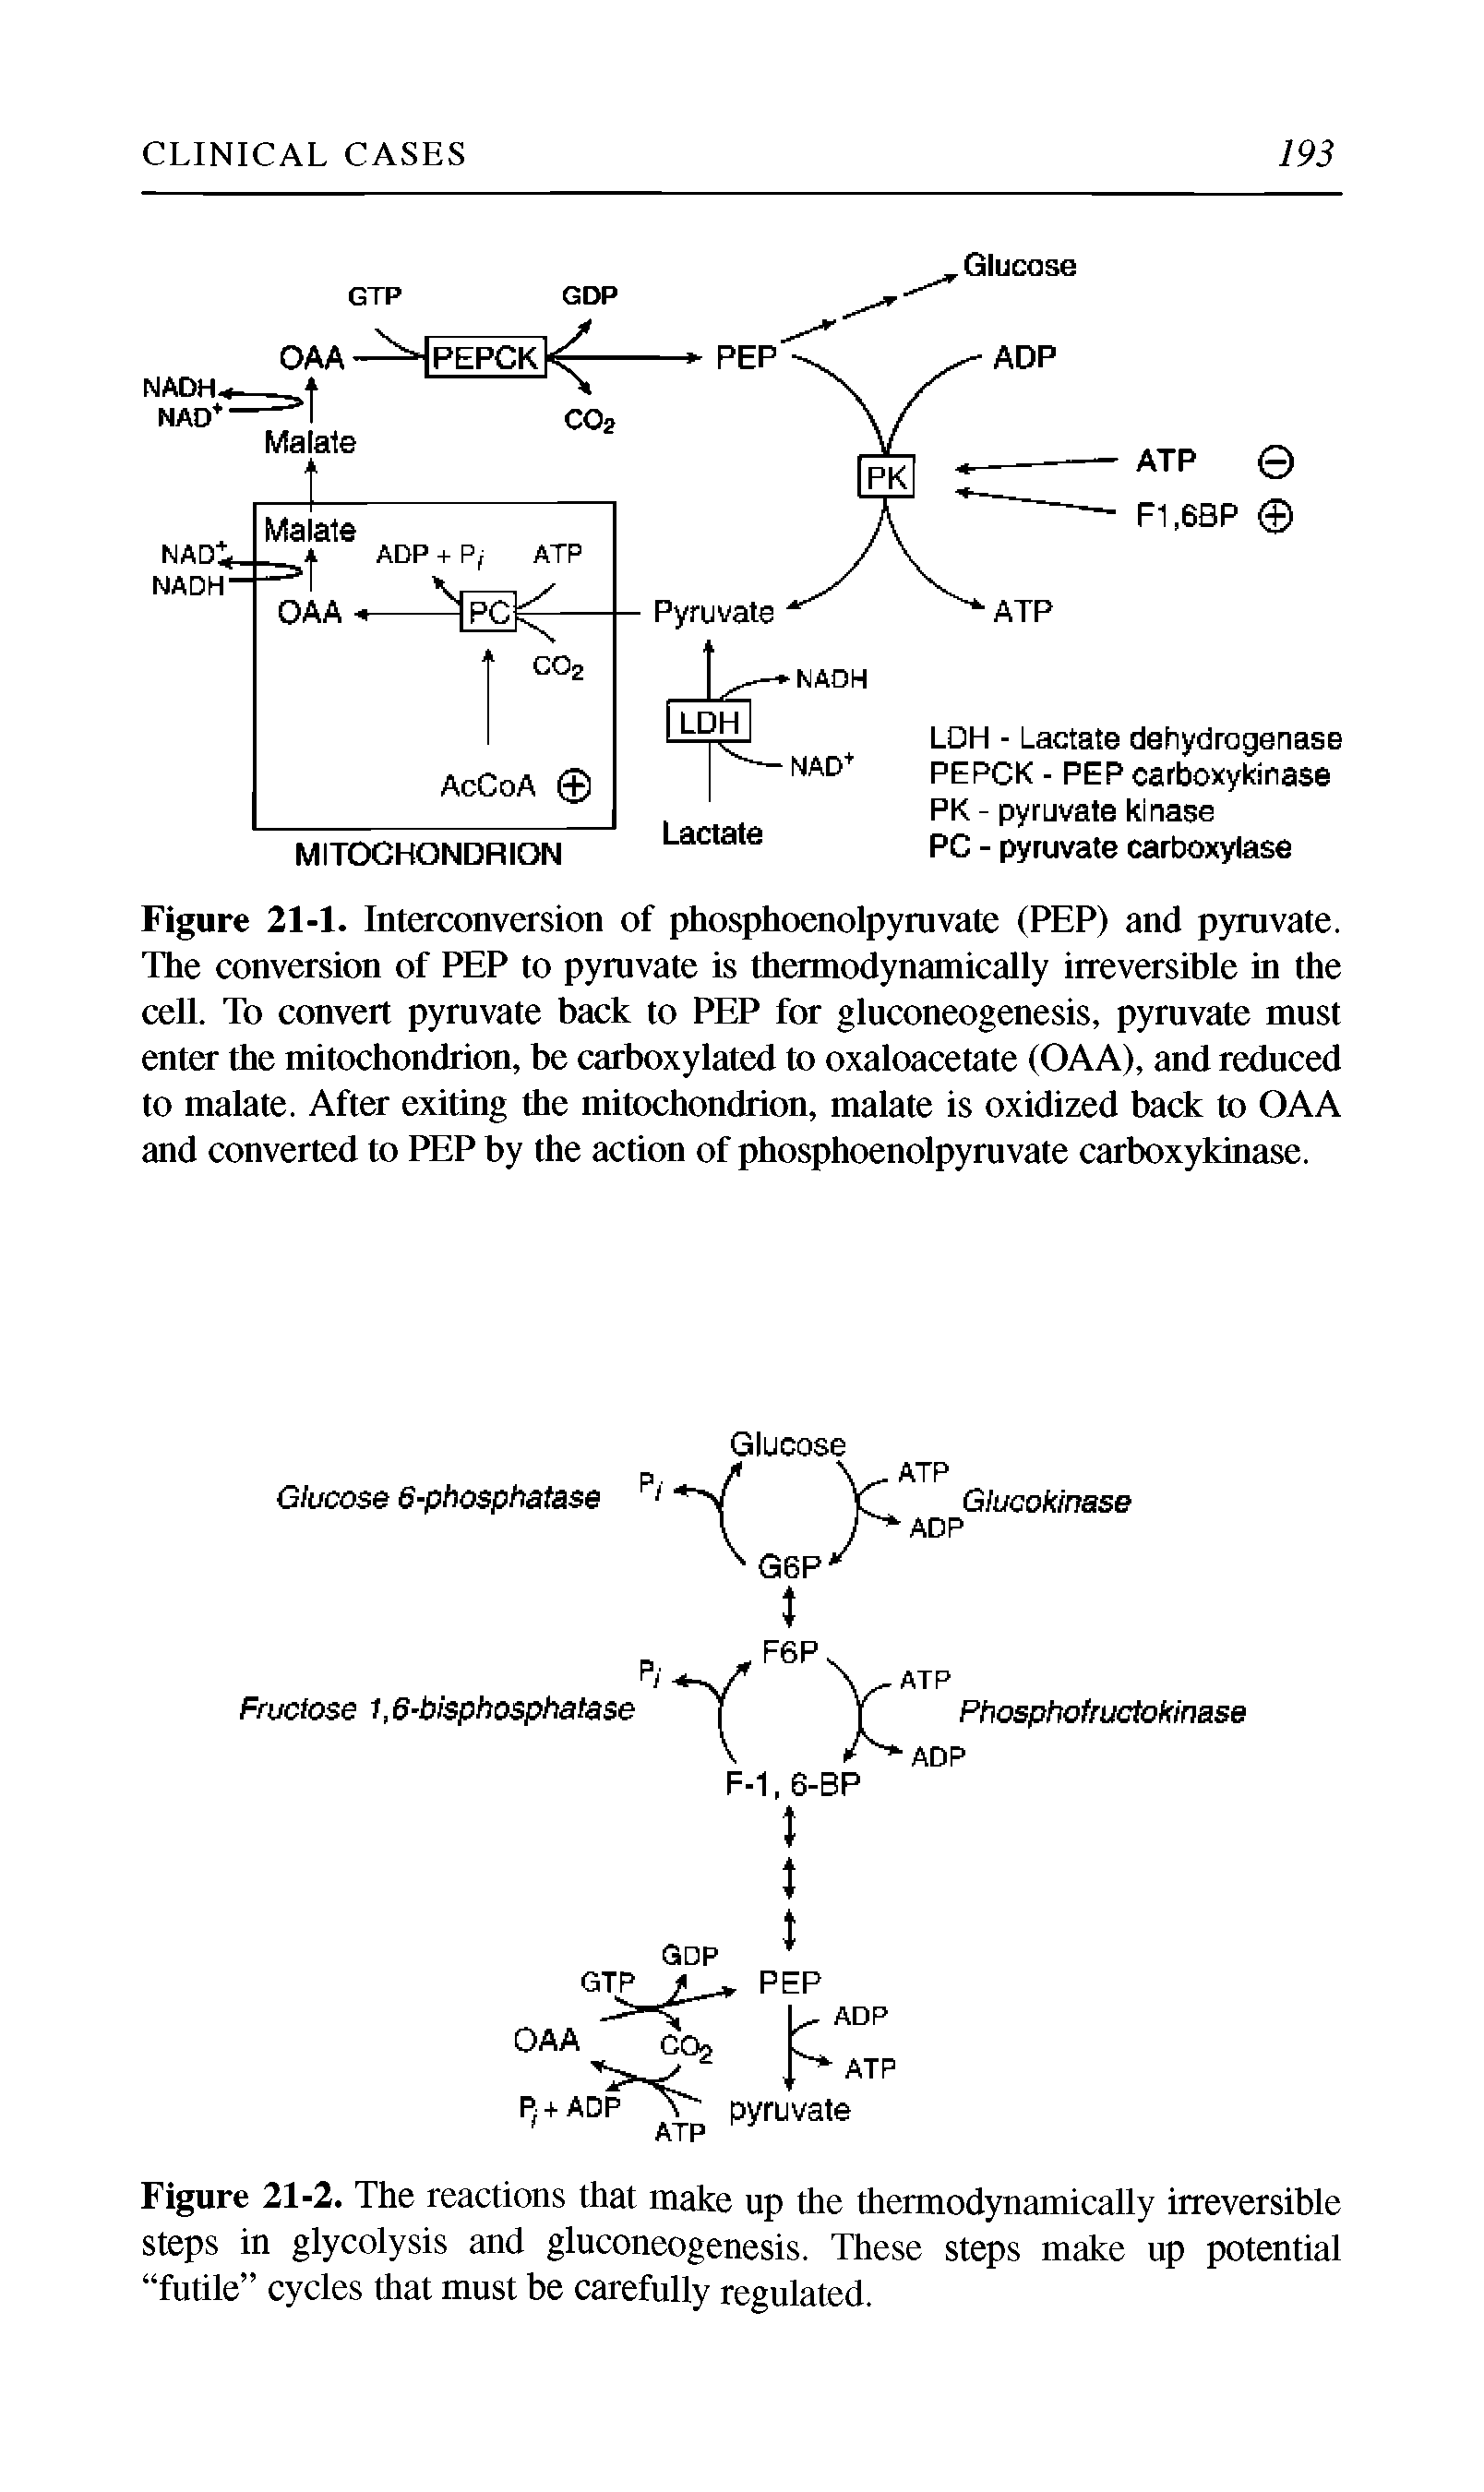 Figure 21-2. The reactions that make up the thermodynamically irreversible steps in glycolysis and gluconeogenesis. These steps make up potential futile cycles that must be carefully regulated.